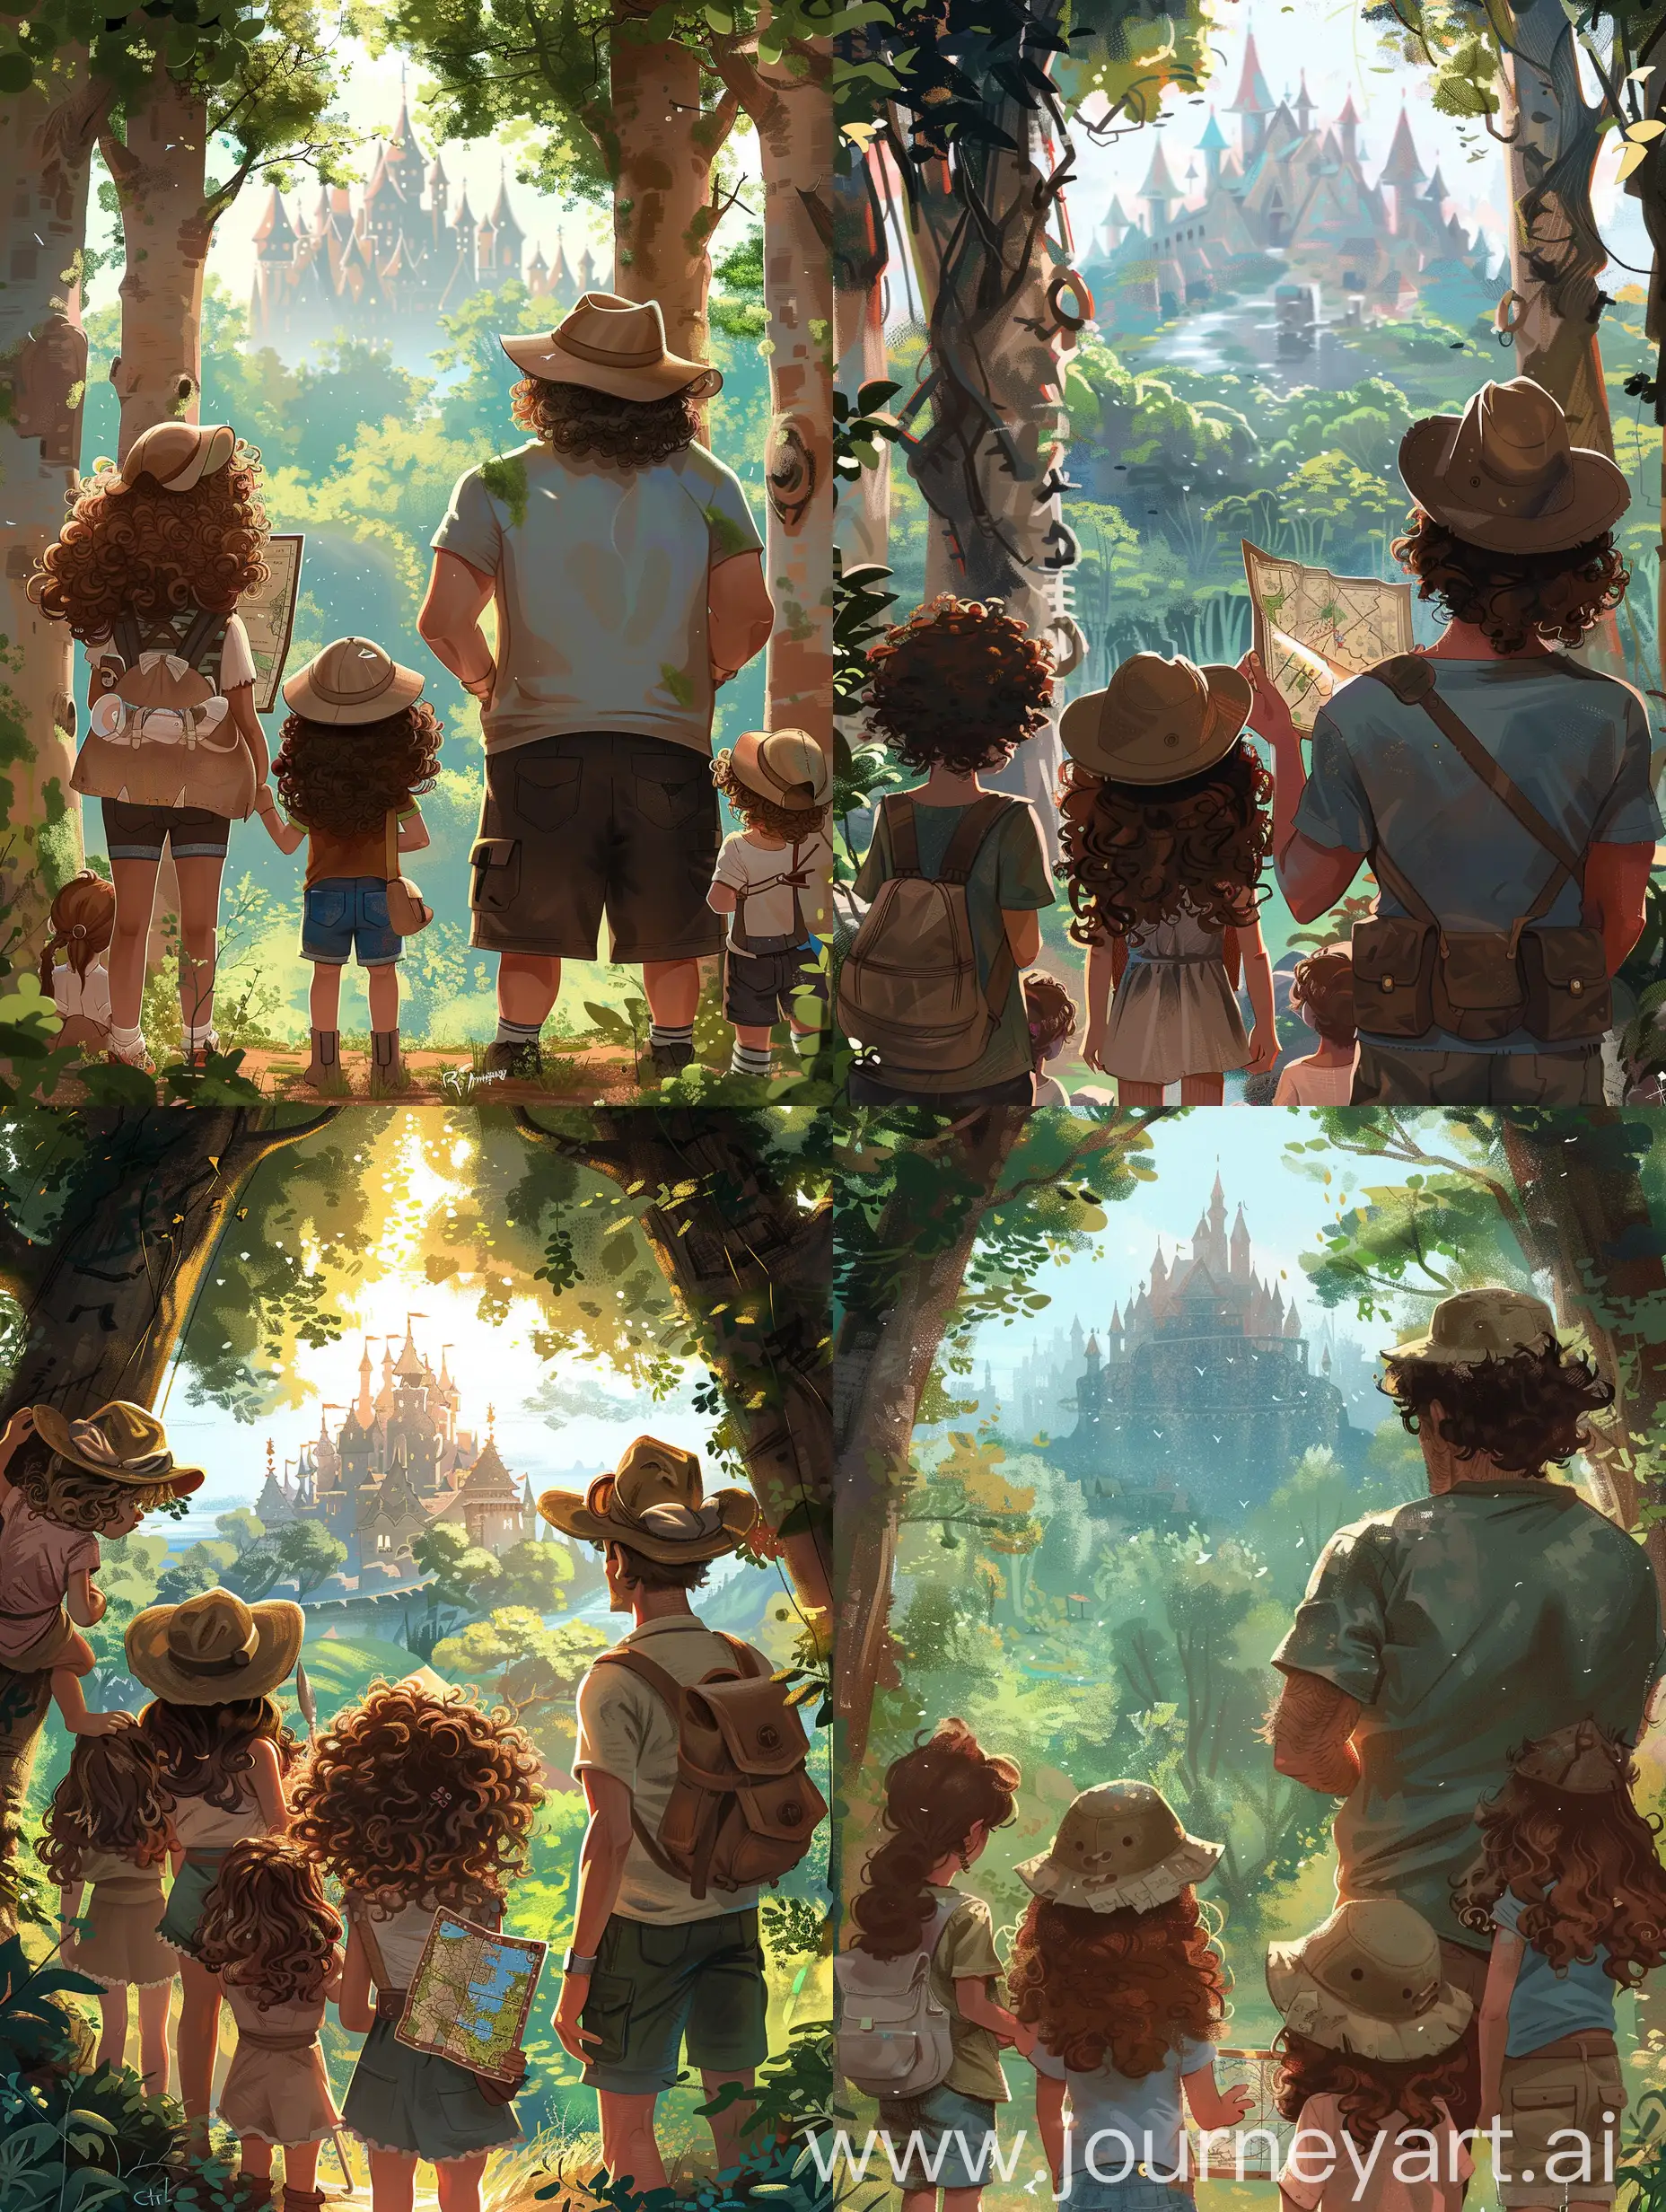 CurlyHaired-Girl-and-Family-Gaze-at-Distant-Kingdom-Adventure-Digital-Illustration